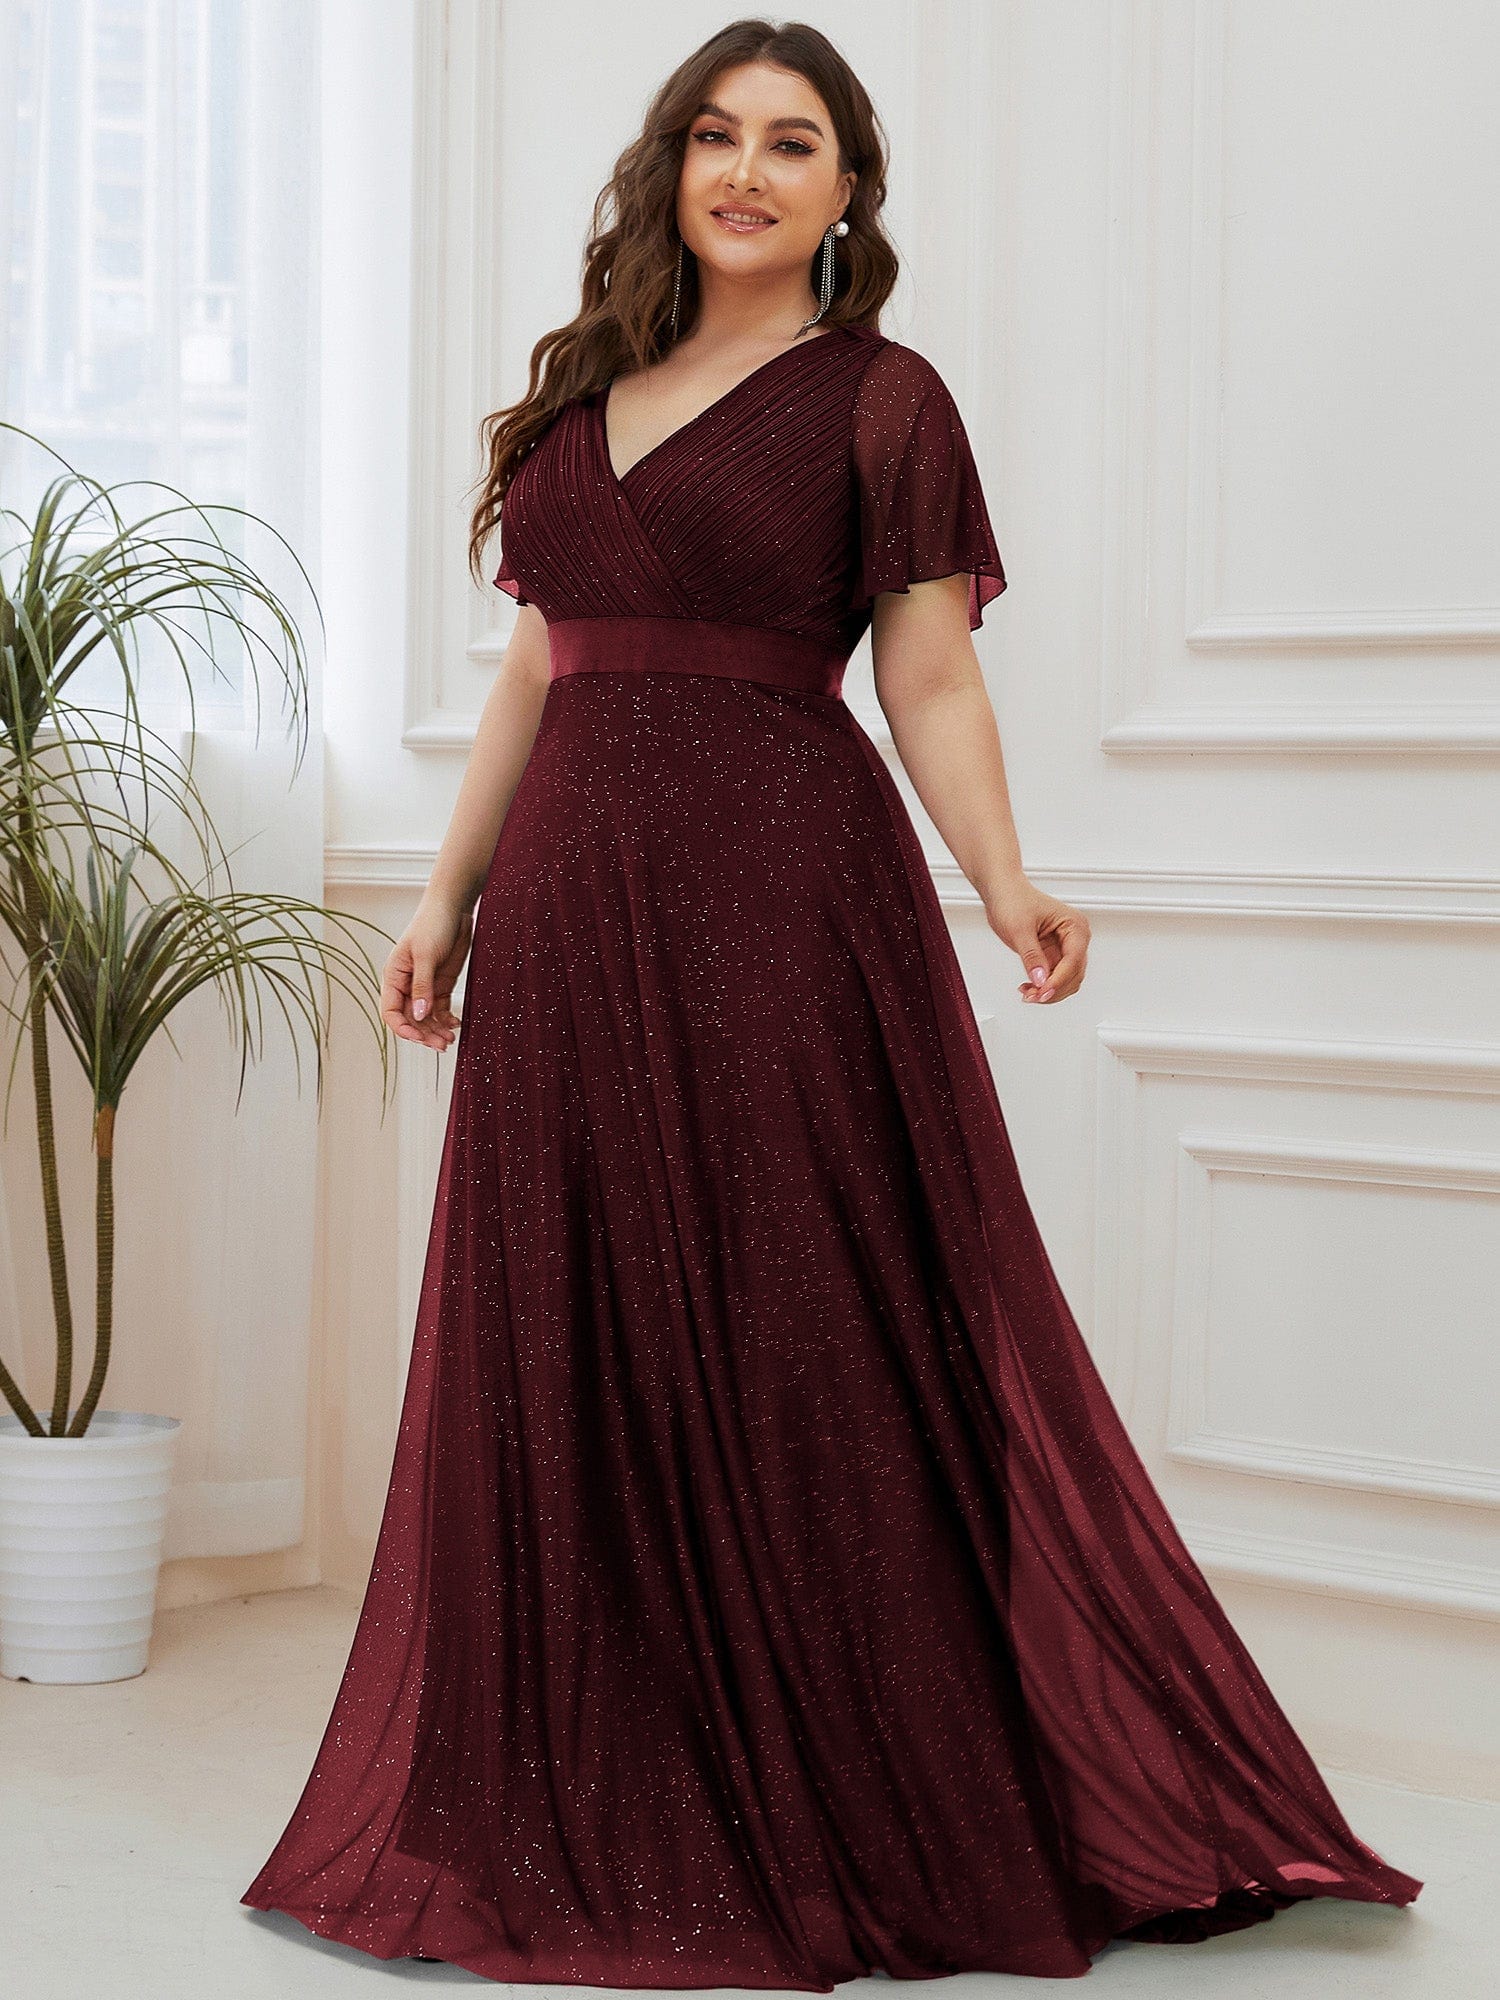 dress for big tummy  Plus size evening gown, Plus size gowns